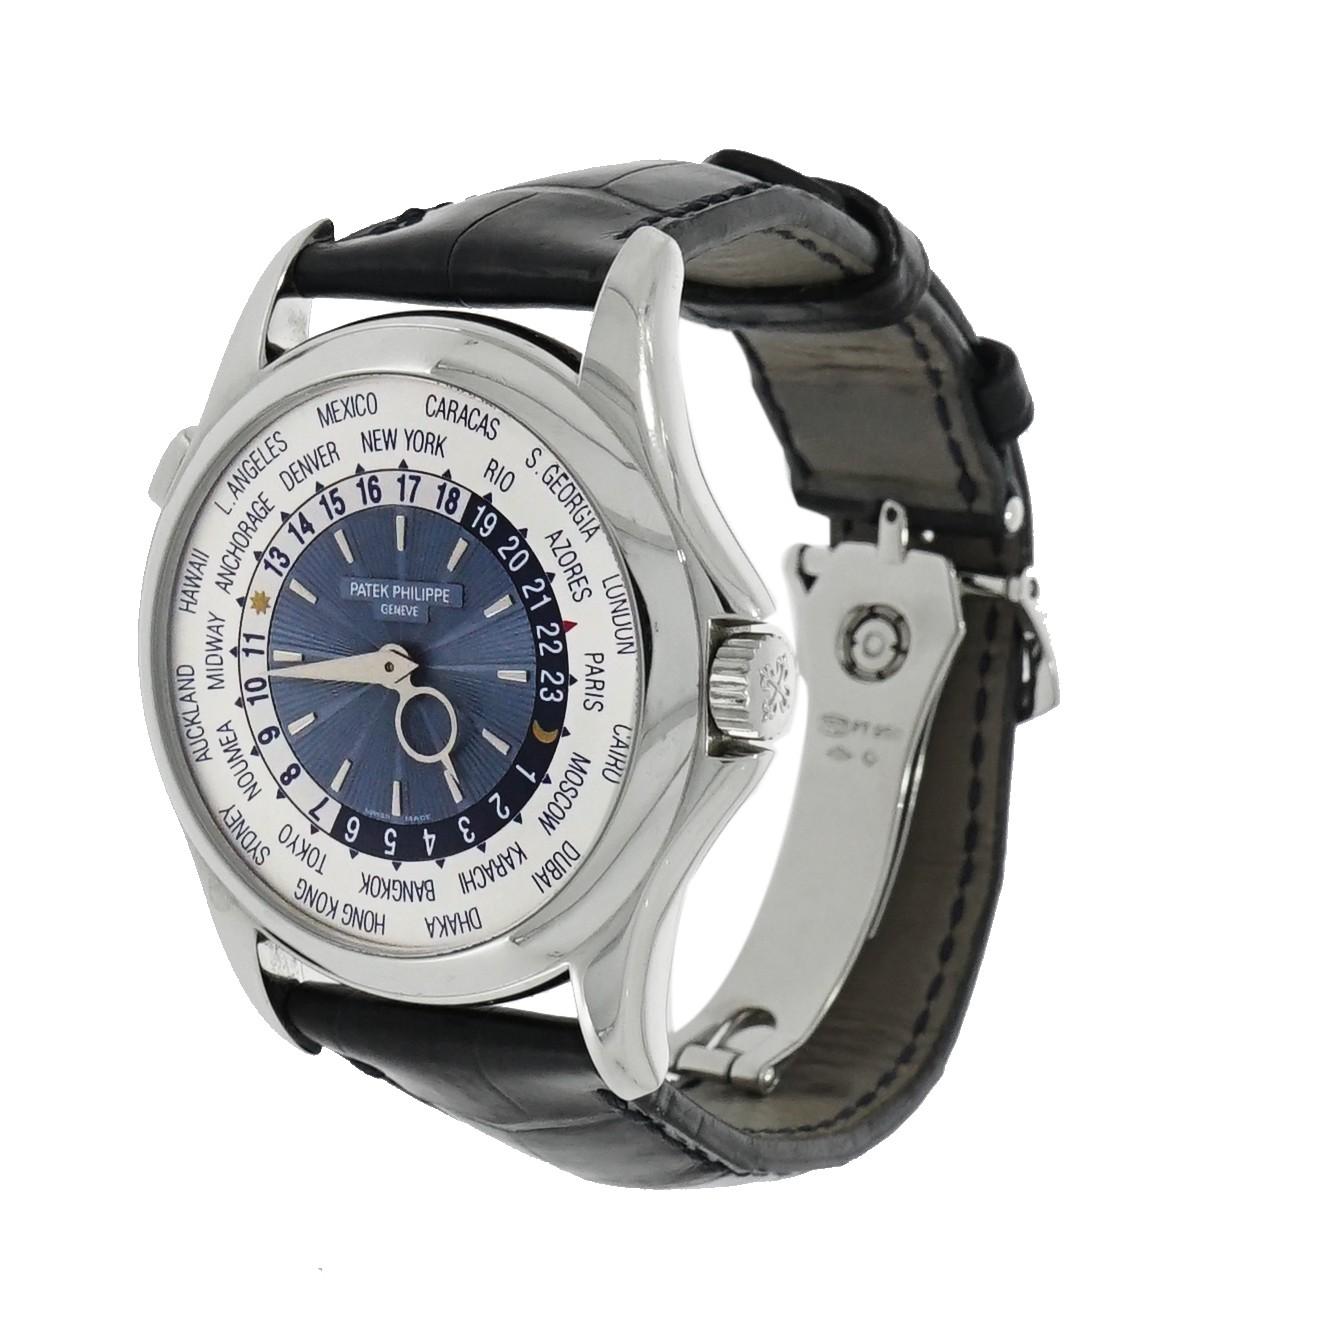 Pre-owned in good condition Patek Philippe World Timer, 39mm platinum case, automatic movement, caliber 240HV, 33 jewels, beating at 21,600vph, 48 hours of power reserve, exhibition case  back, sunray blue Arabic number hour markers dial, day night 